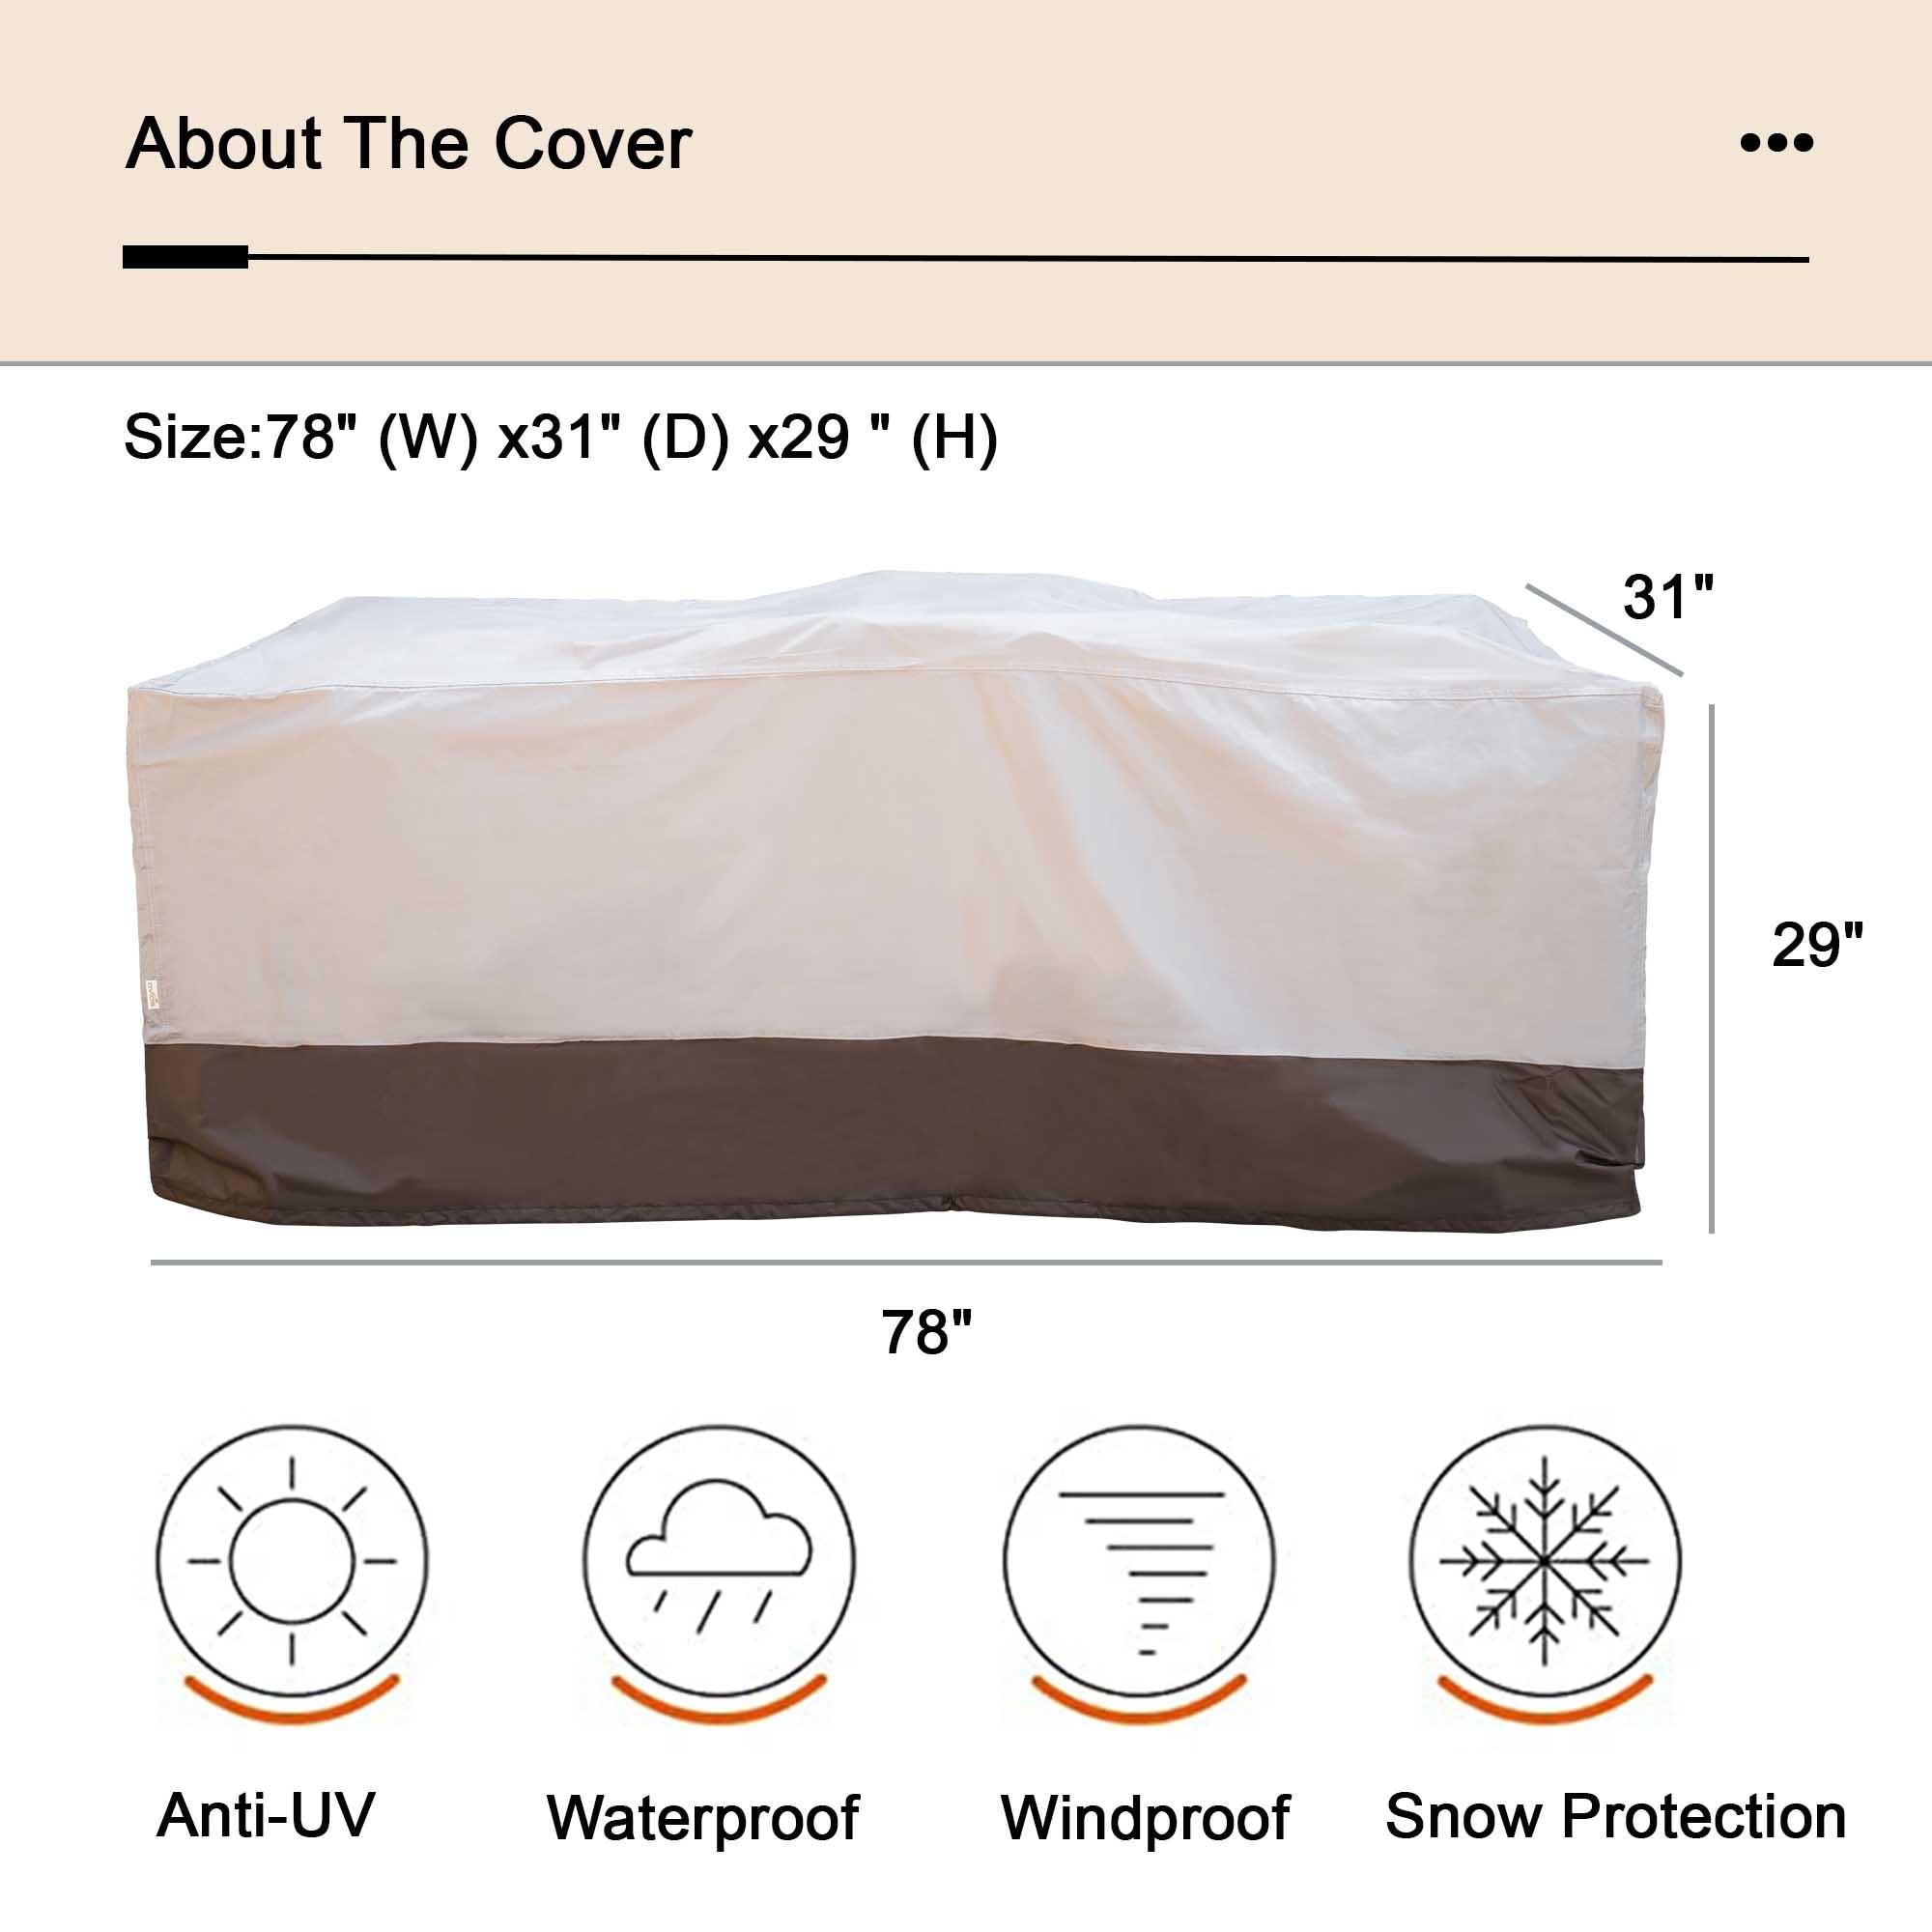 Ovios Outdoor Sofa Cover Waterproof for GRS/DAR Series (Refer to the Dimension in Description)